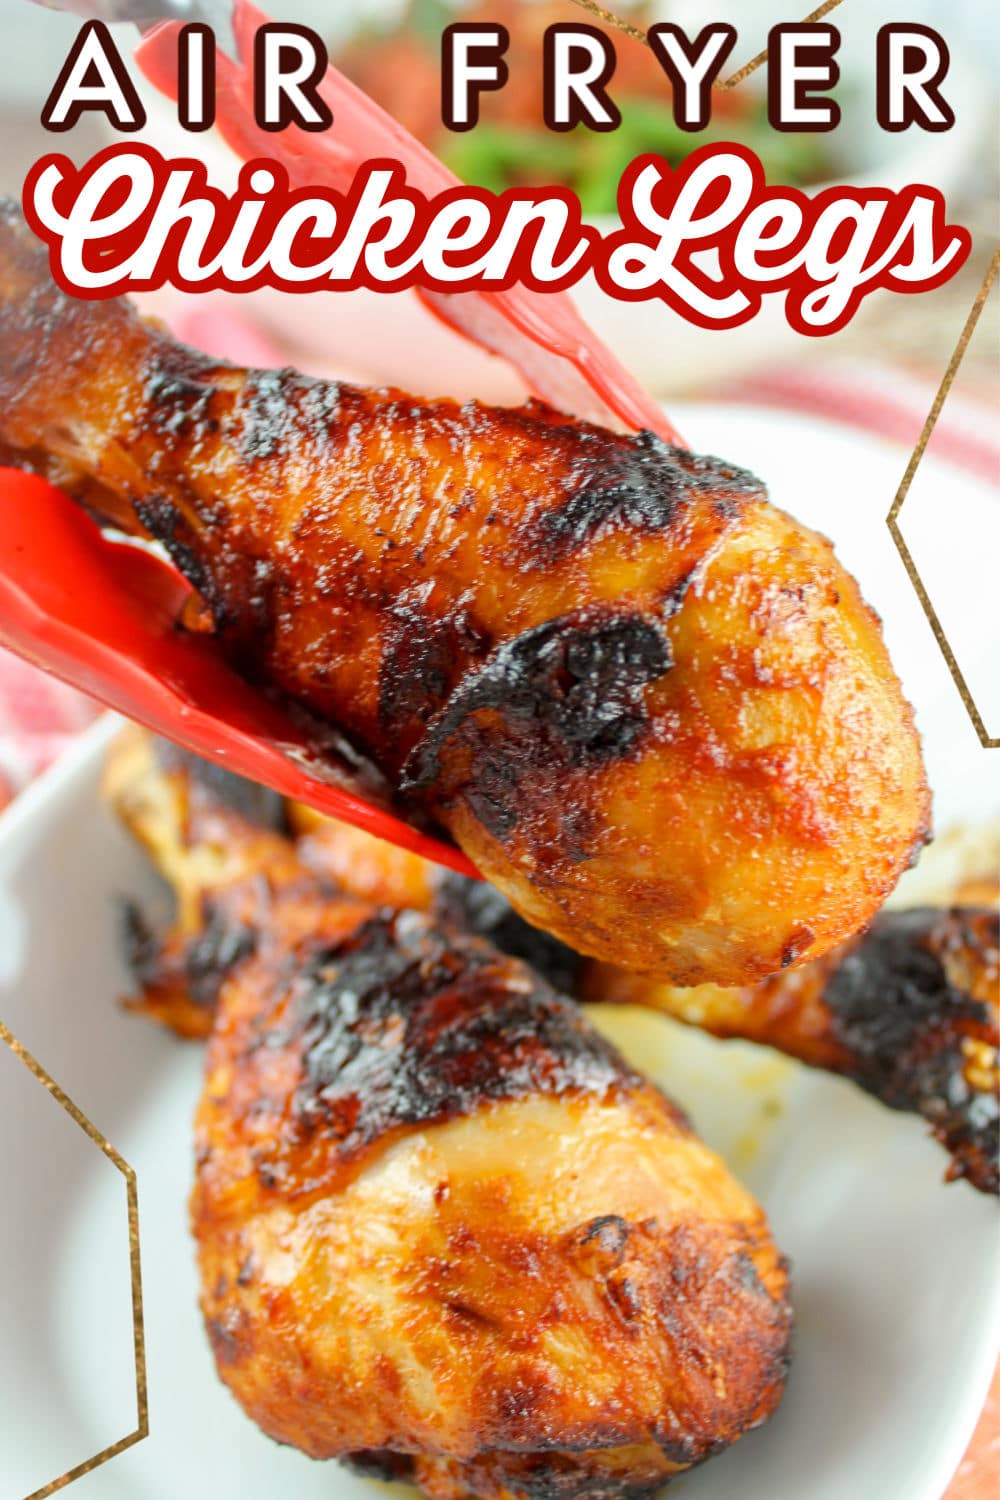 Chicken legs are so easy to make in the air fryer and they brown up amazingly! I put these together with a simple marinade with items you already have in your pantry. They’re also so juicy!!!
 via @foodhussy